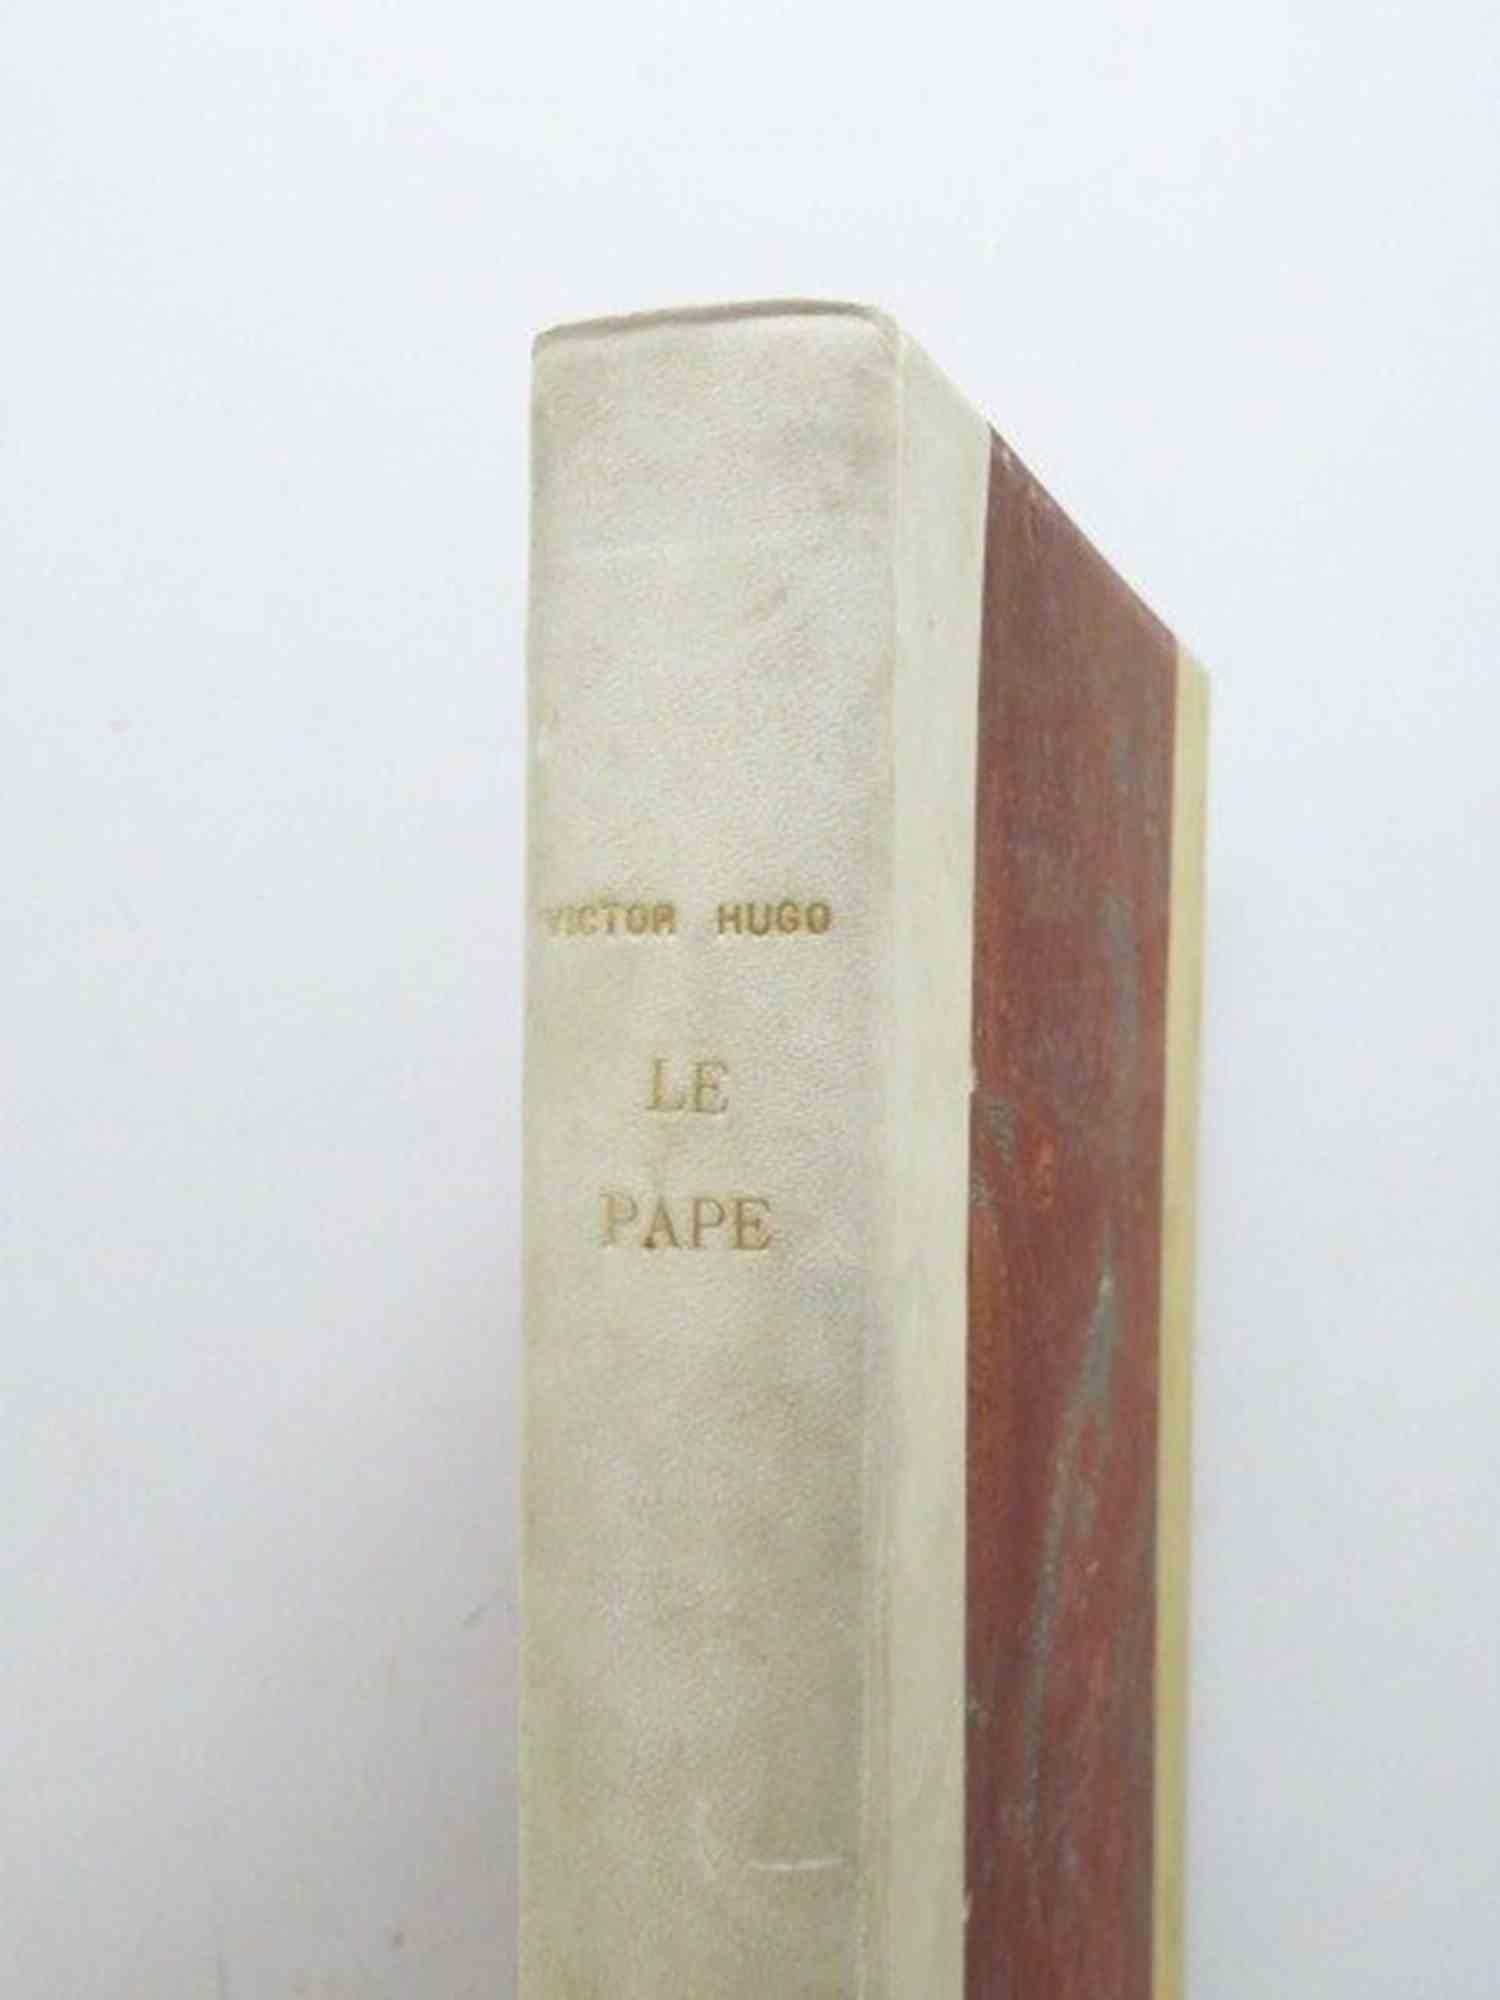 Le Pape - Rare Book by Victor Hugo - 1885 For Sale 6